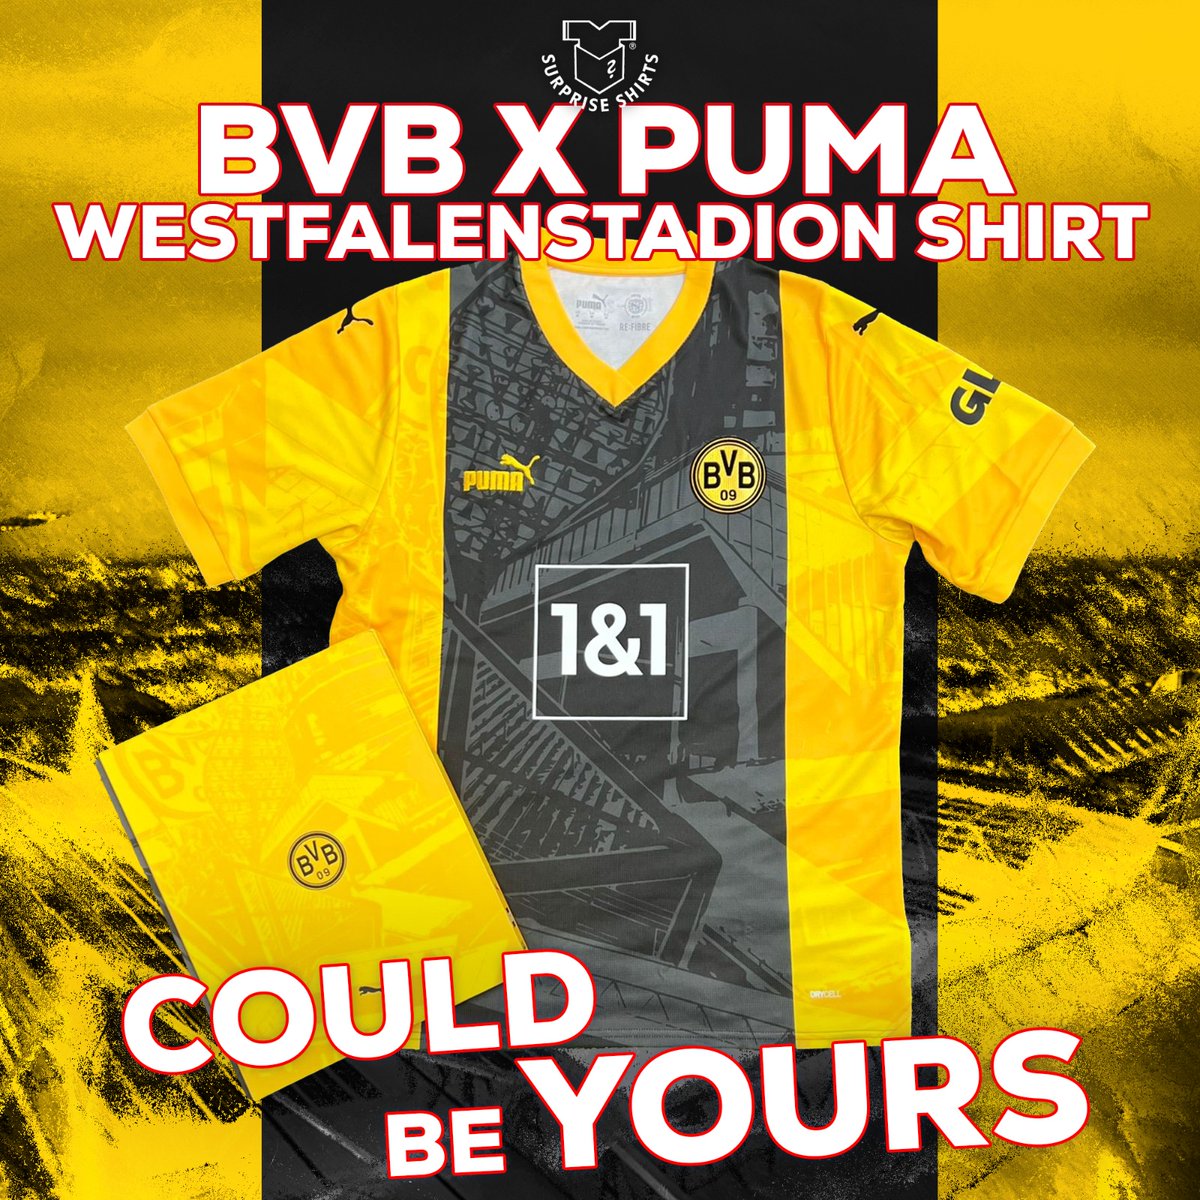 Everyone who buys a Surprise Shirt today has chance to win the Borussia Dortmund 'Westfalenstadion' shirt! 😍 Celebrating 50 years of the home of the iconic Yellow Wall, it comes in unique collector's box 🔥 It could be yours 👀👇 surpriseshirts.co.uk